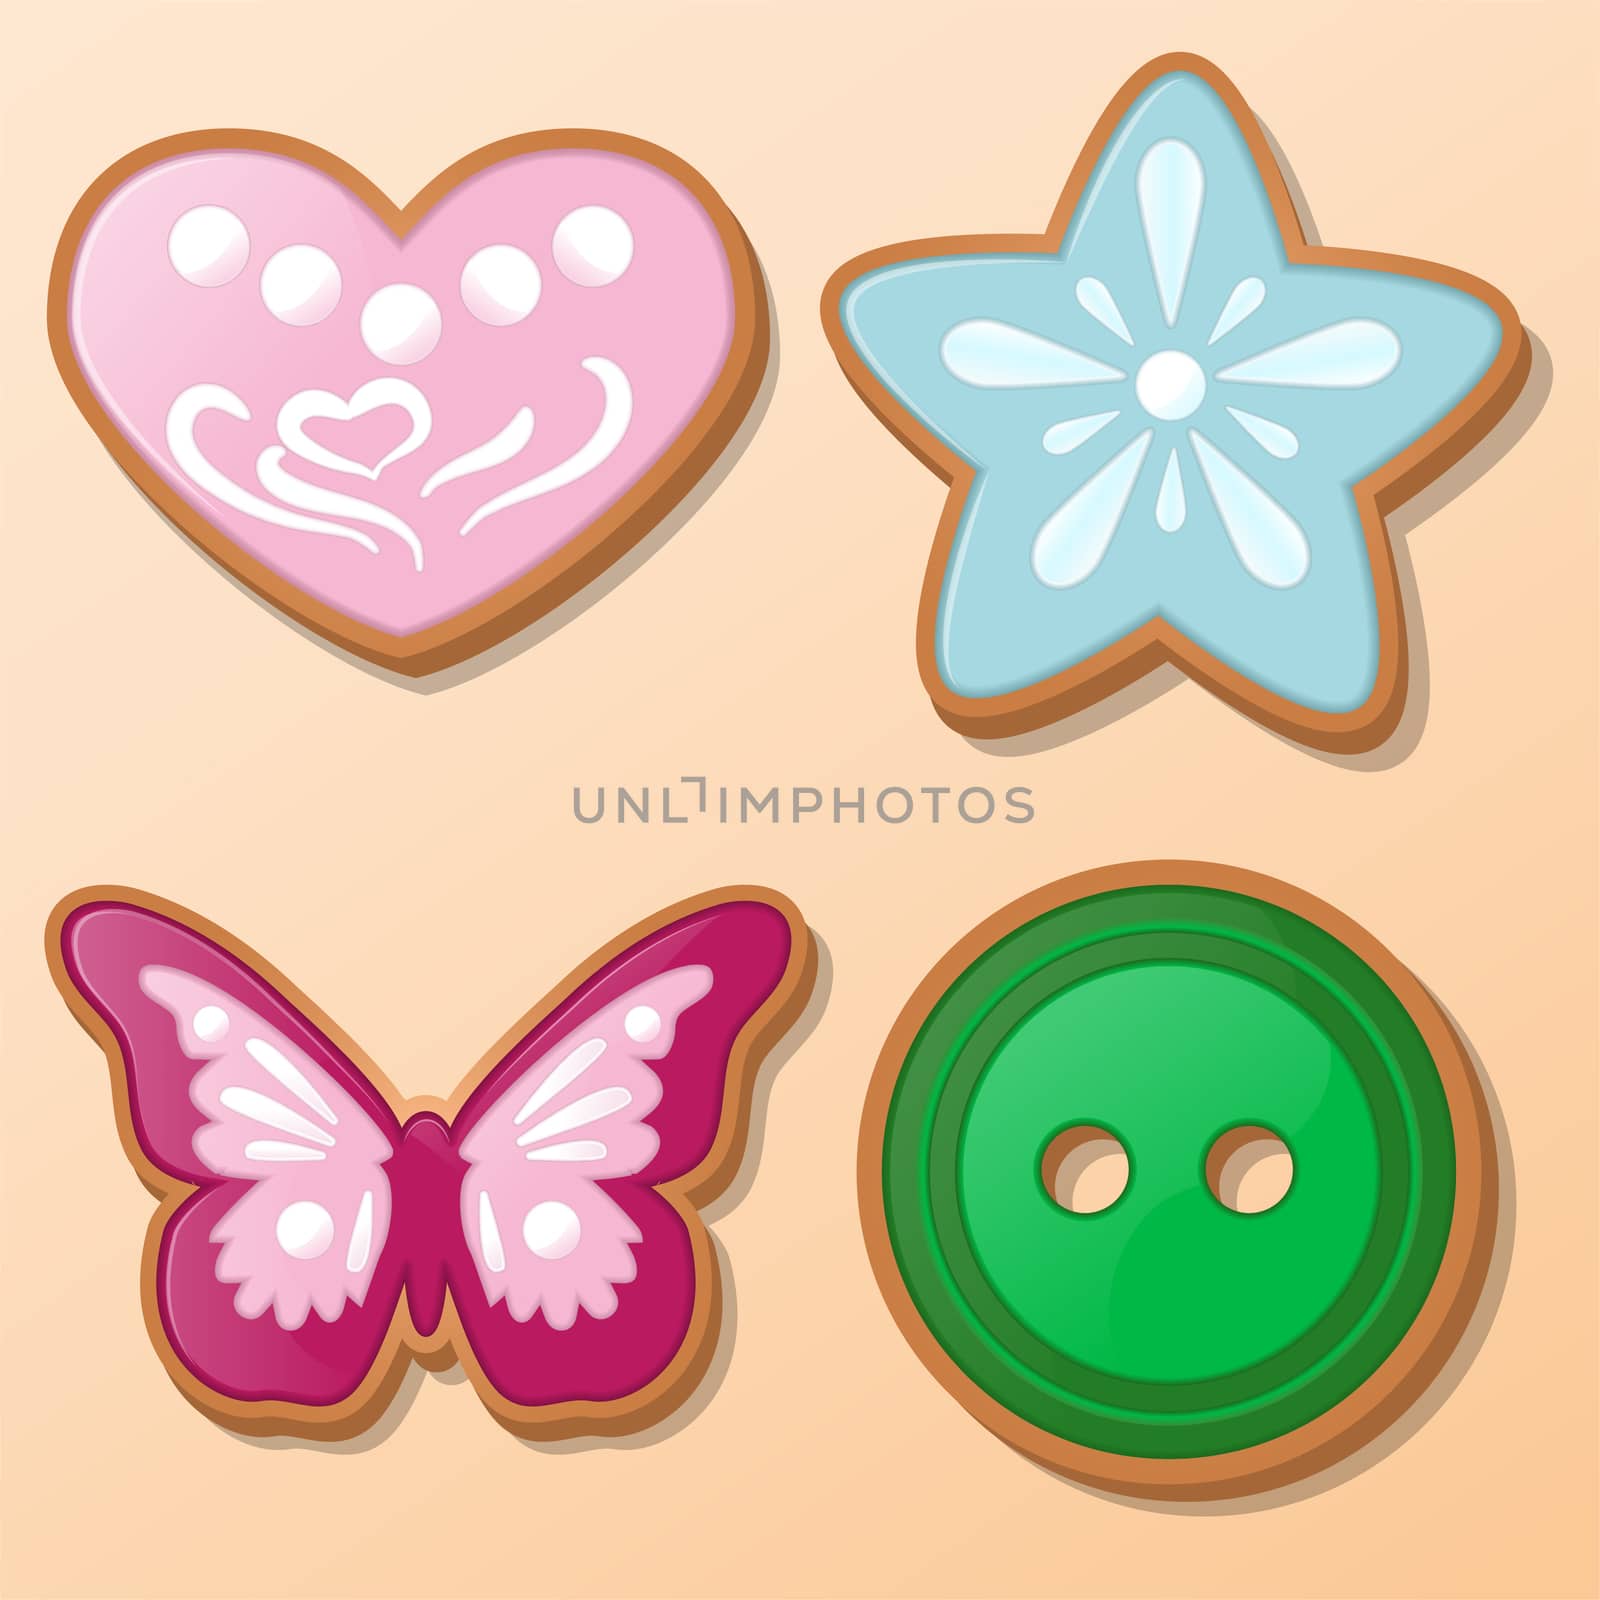 heart, star, butterfly, button in the form of a cookie on a bright background. by Adamchuk